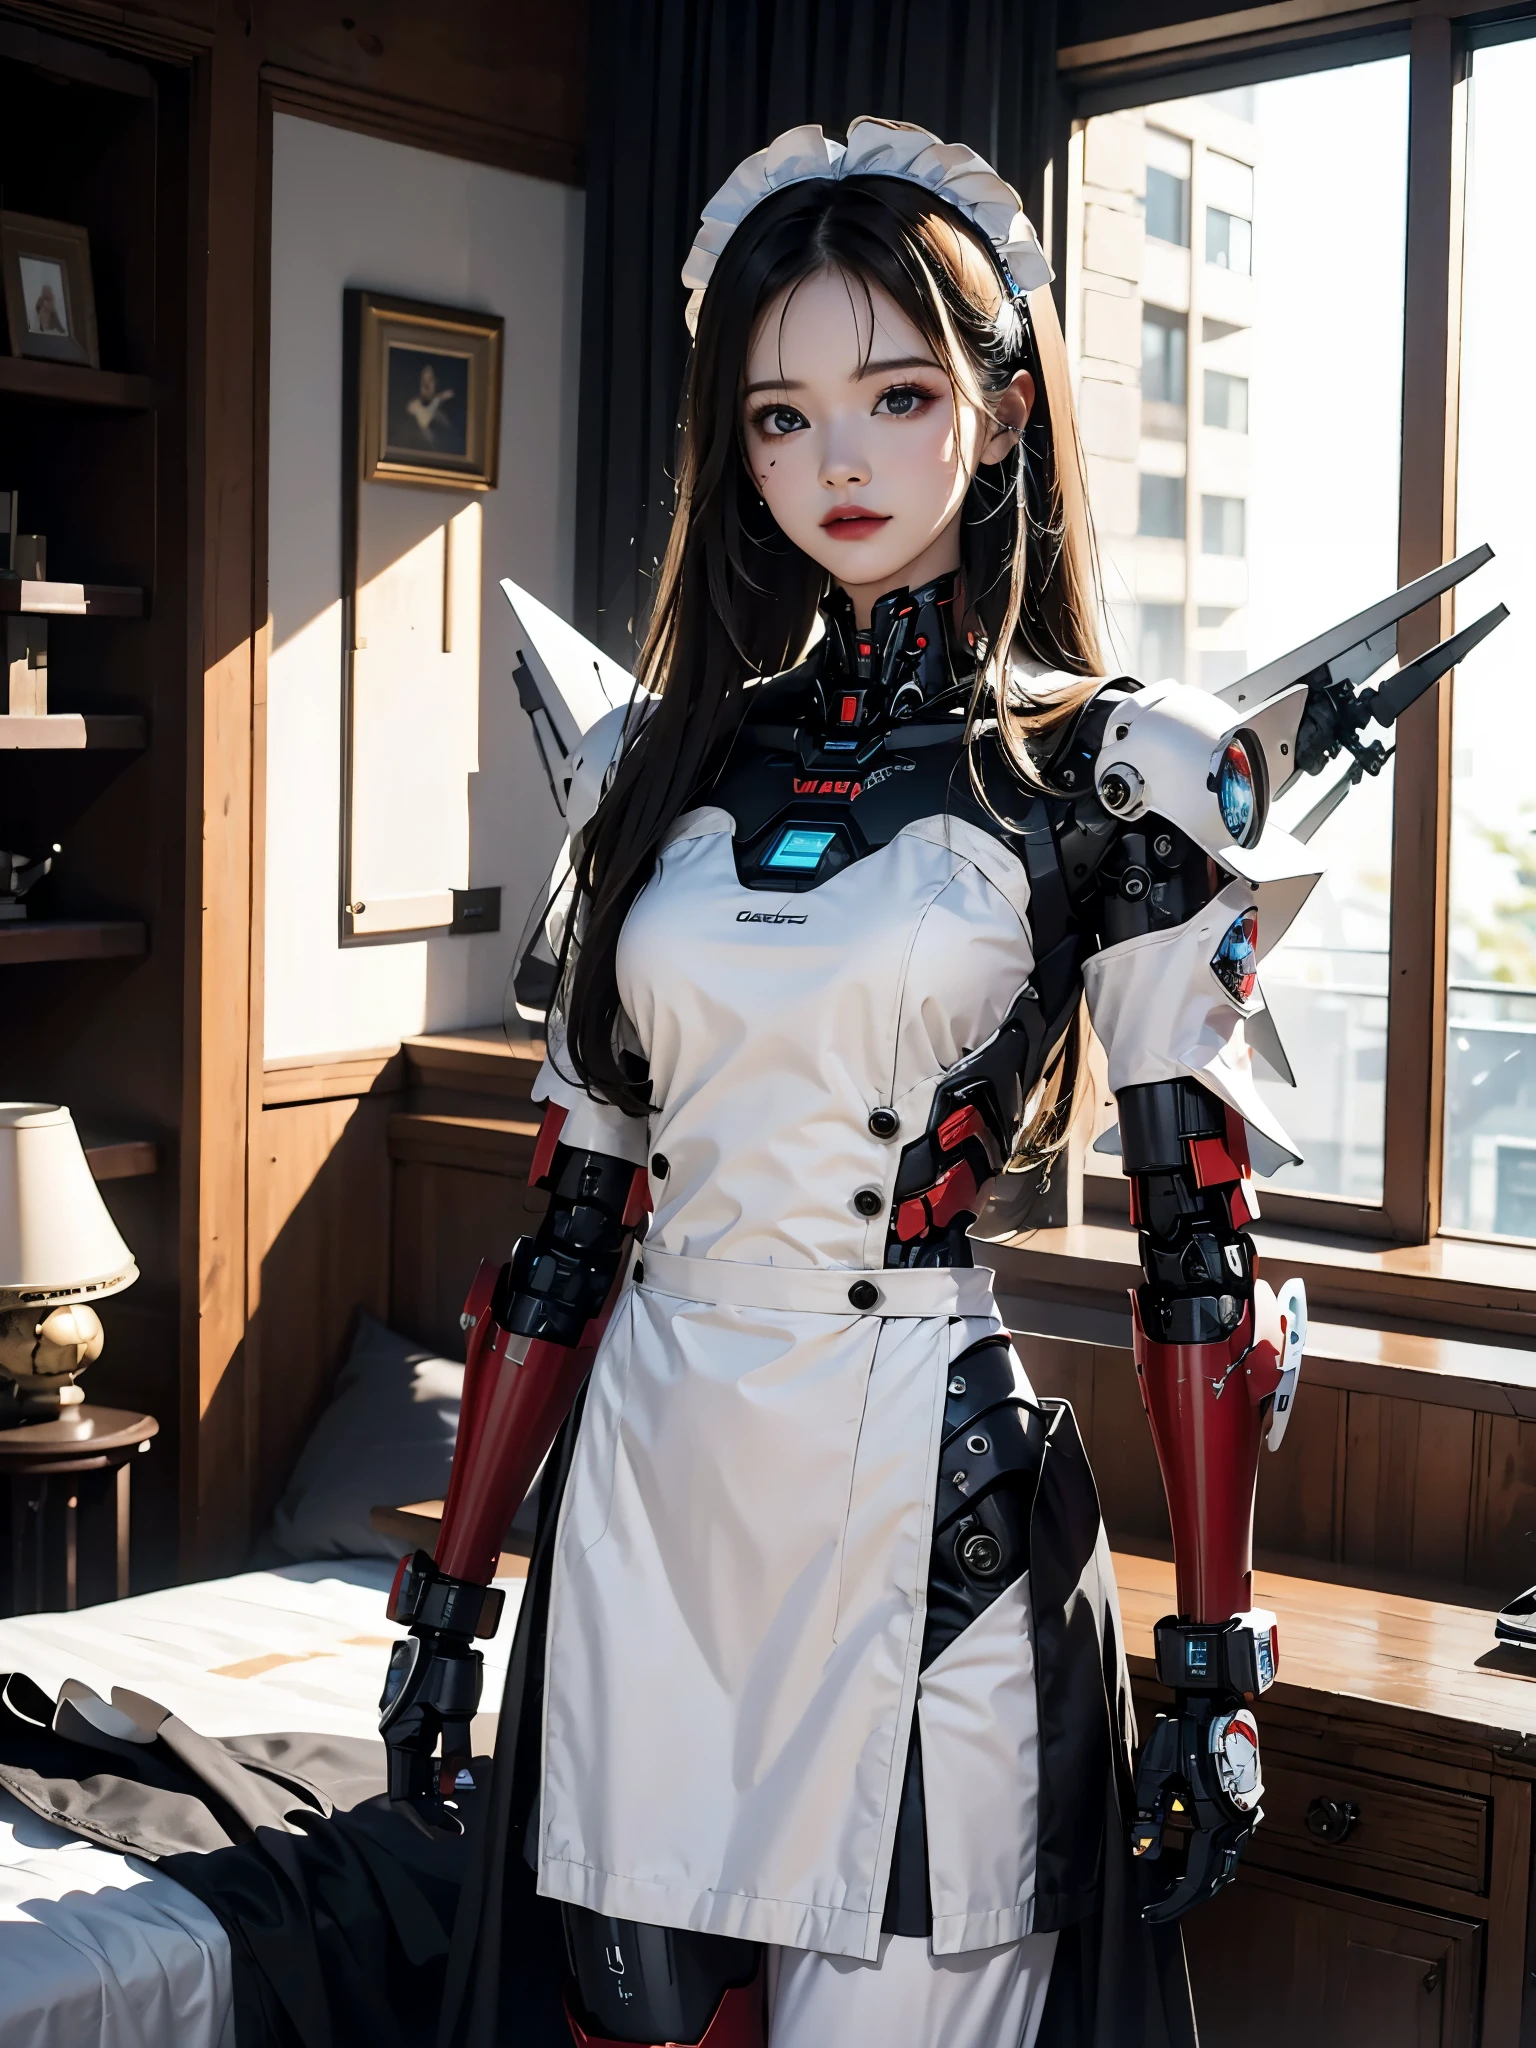 rough skin, Super detailed, advanced details, high quality, 最high quality, High resolution, 1080P, hard disk, beautiful,(War Machine),beautiful cyborg mixed maid female, Mecha cyborg girl,battle mode,Mecha body girl,She is wearing a futuristic War Machine weapon mech., from front, from skirt up, in cute room, bed room, bed,